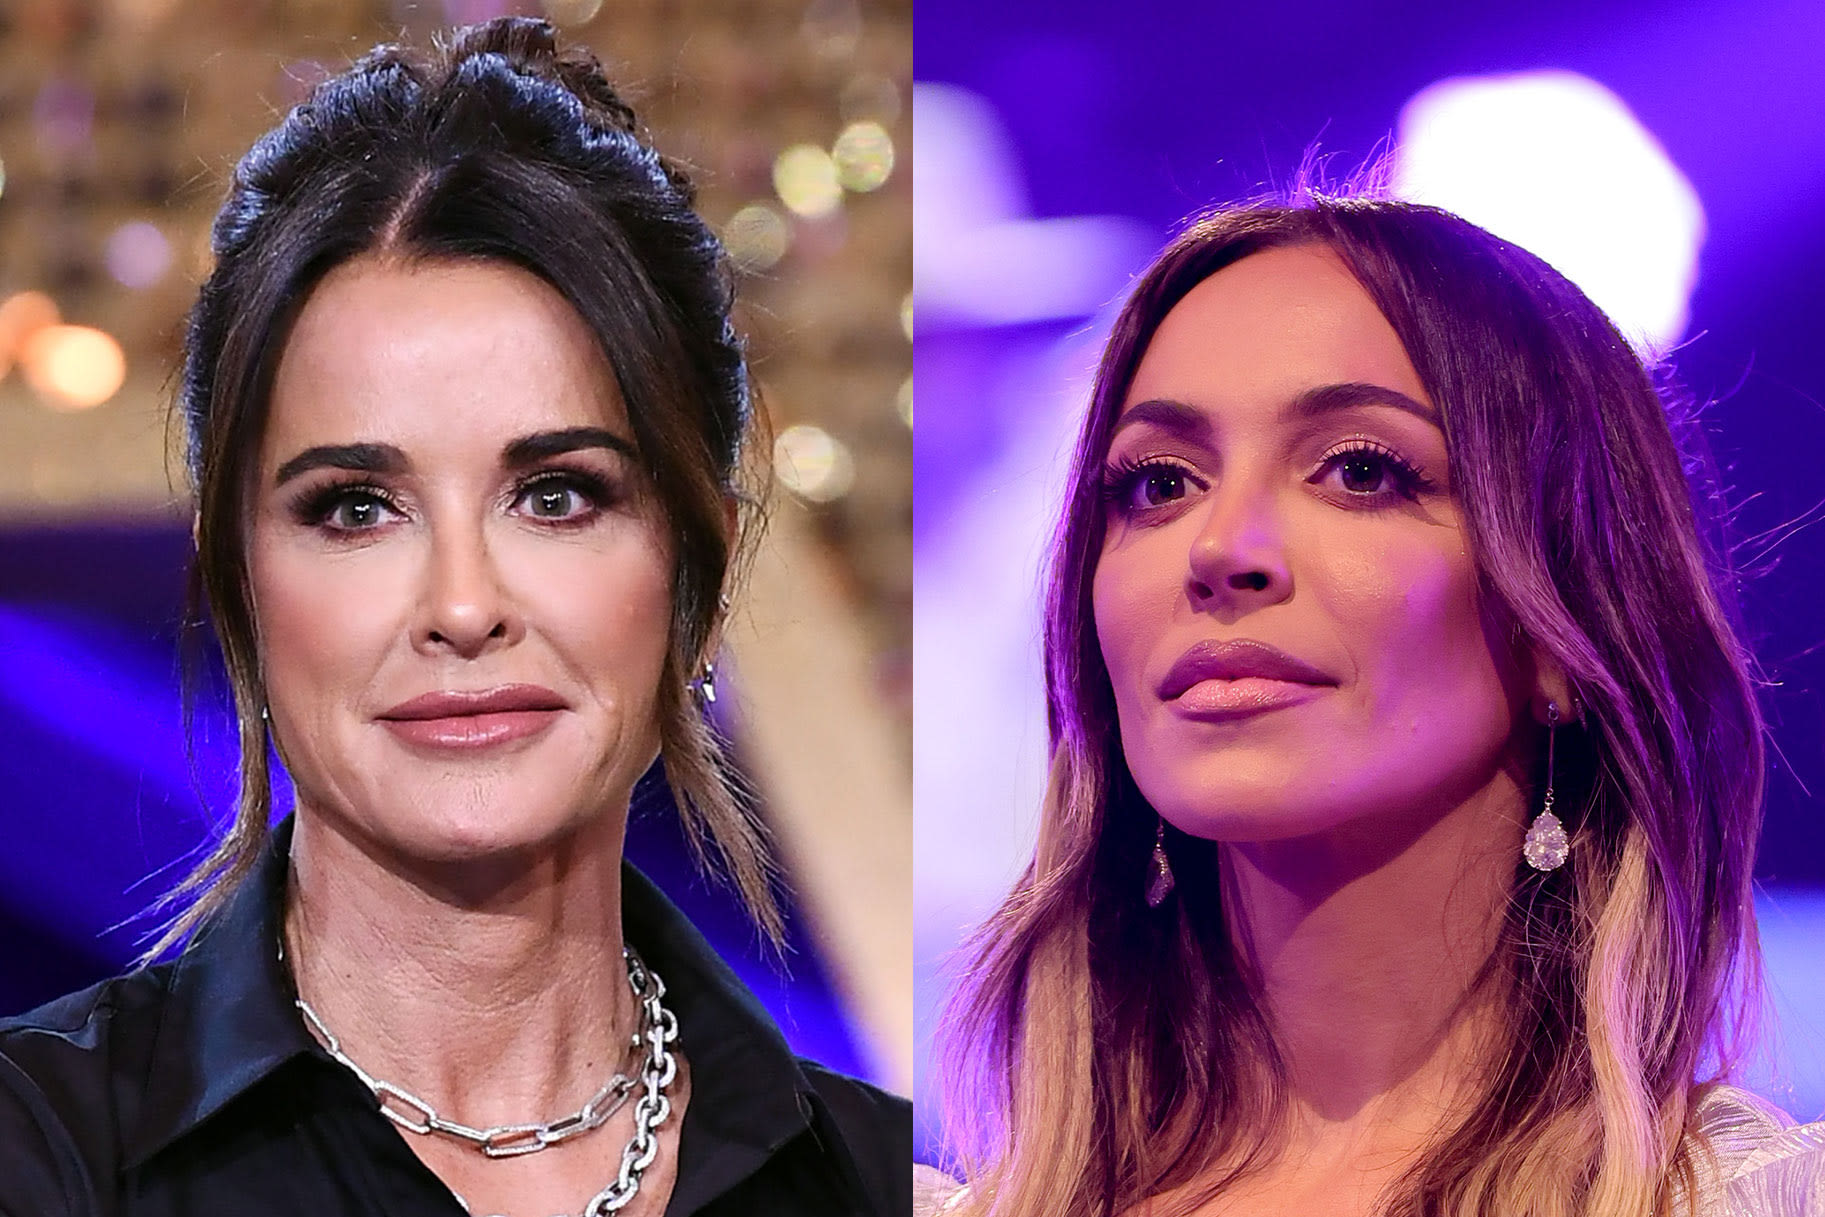 Kyle Richards Speaks Out After Farrah Brittany's Burglary: "The Worst Feeling as a Mom" | Bravo TV Official Site